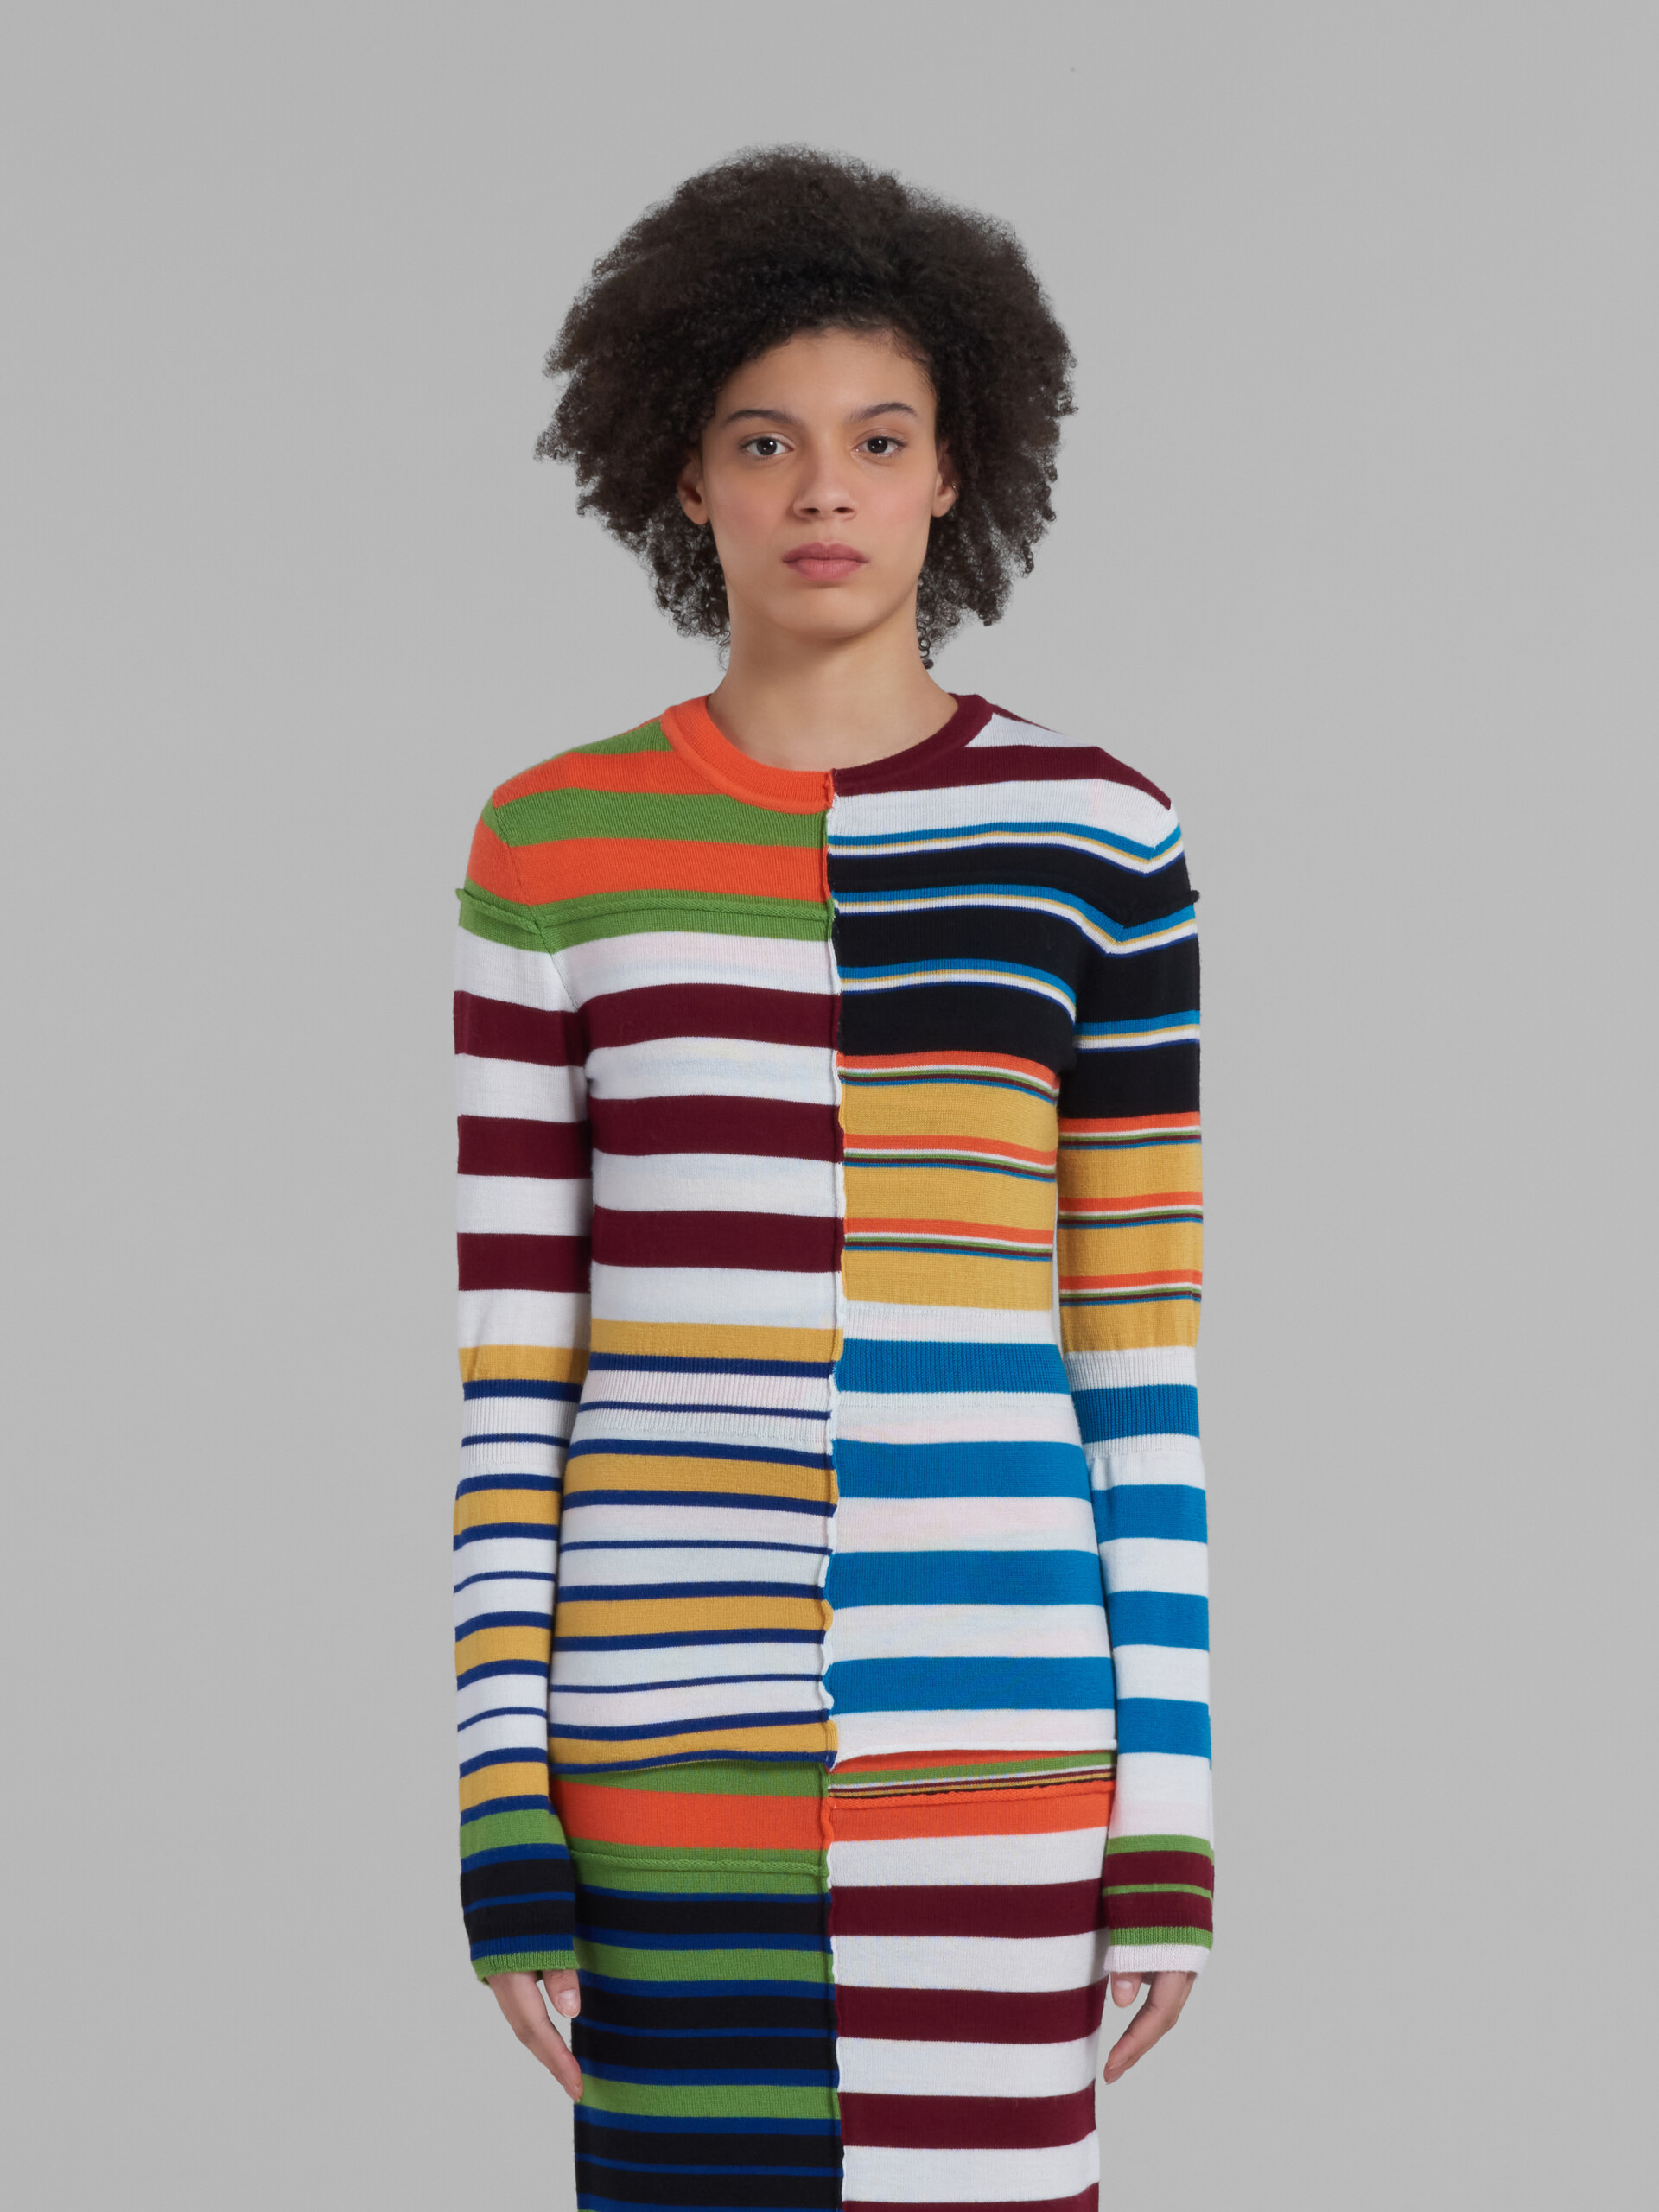 Multicoloured knit sweater with patchwork stripes - Pullovers - Image 2